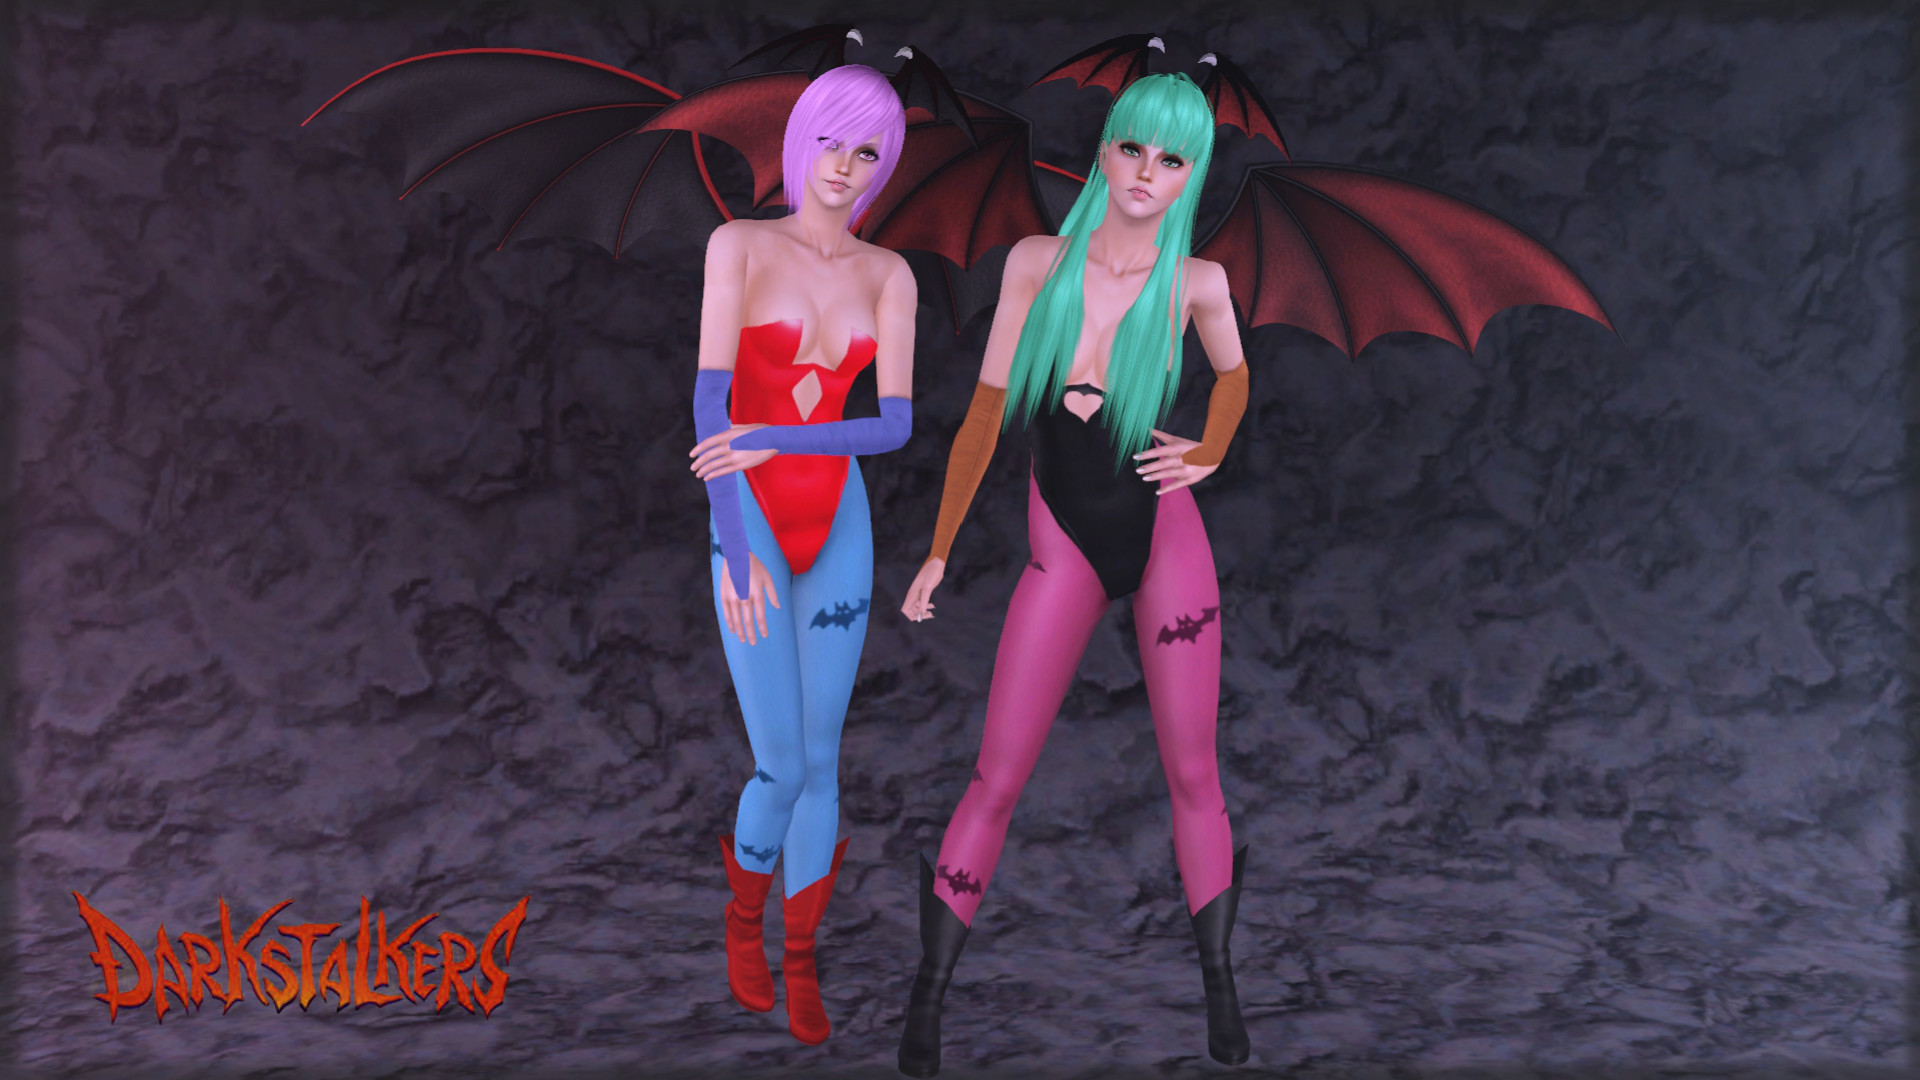 1920x1080 ... The Sims 3: Darkstalkers - Morrigan and Lilith by Tx-Slade-xT